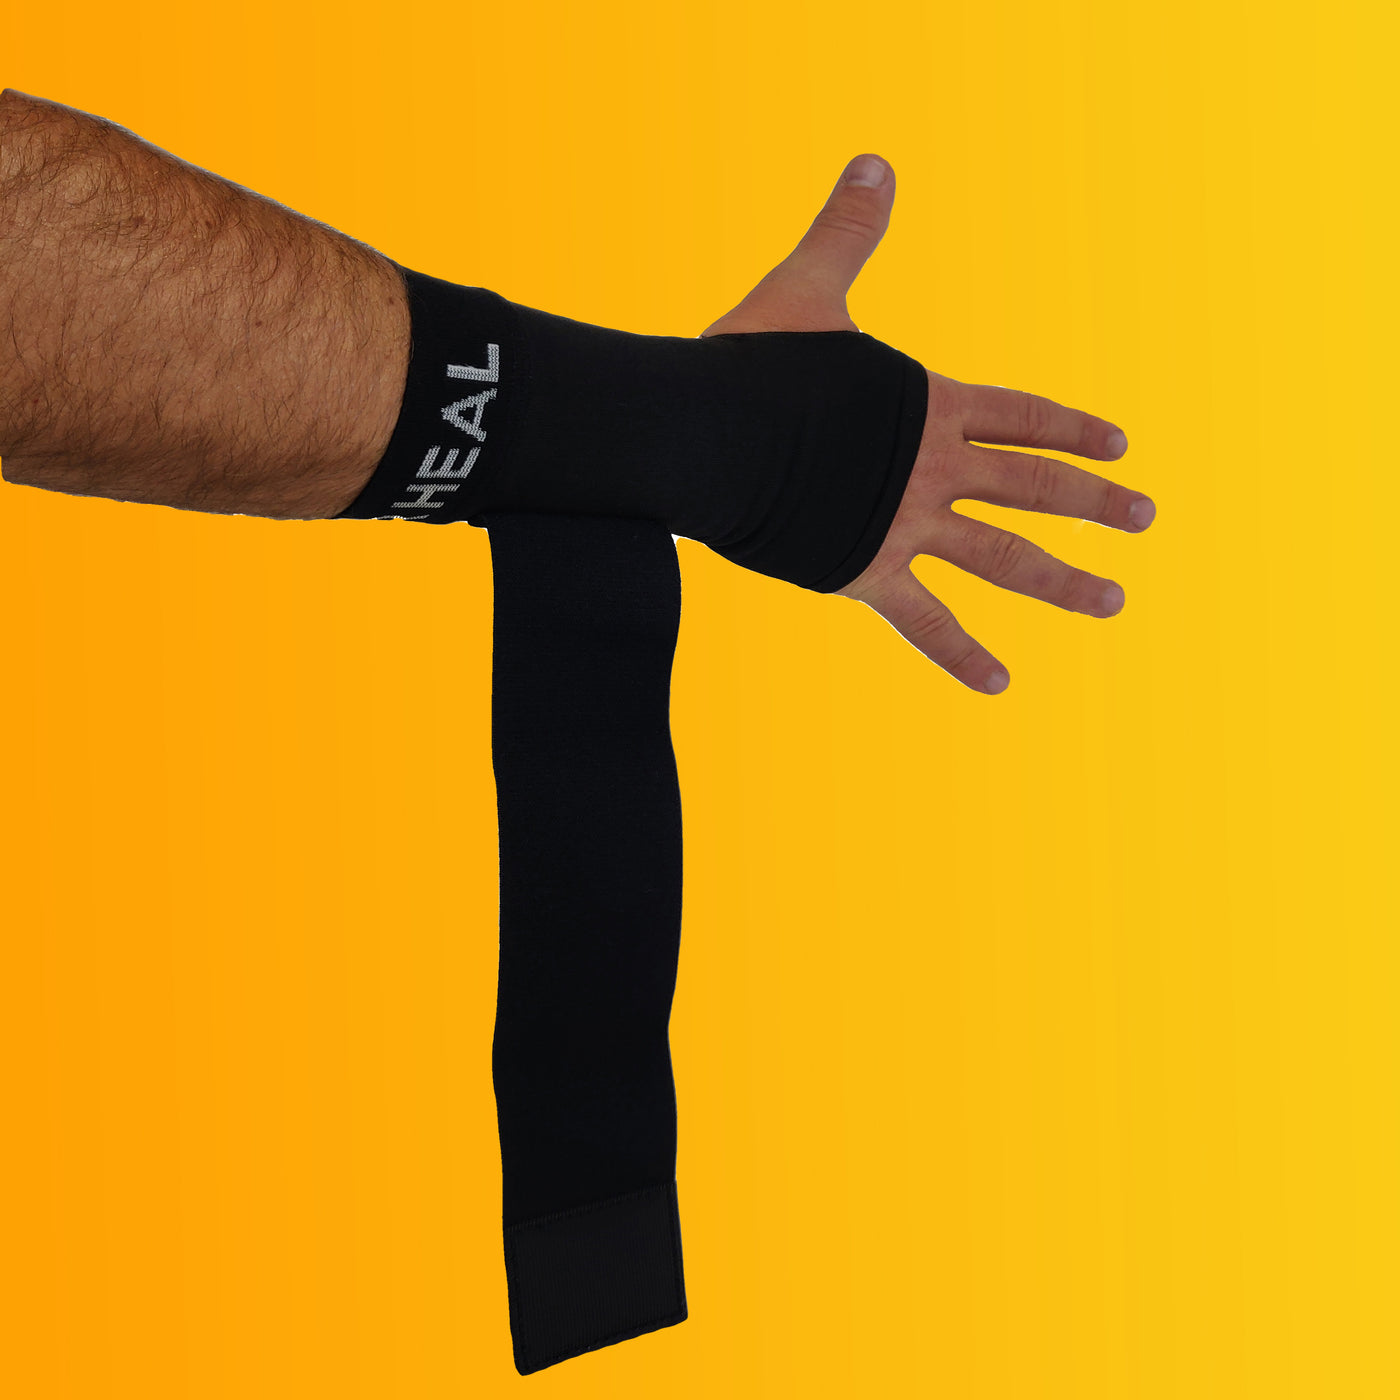 Long Wrist Compression Sleeve - COPPER HEAL